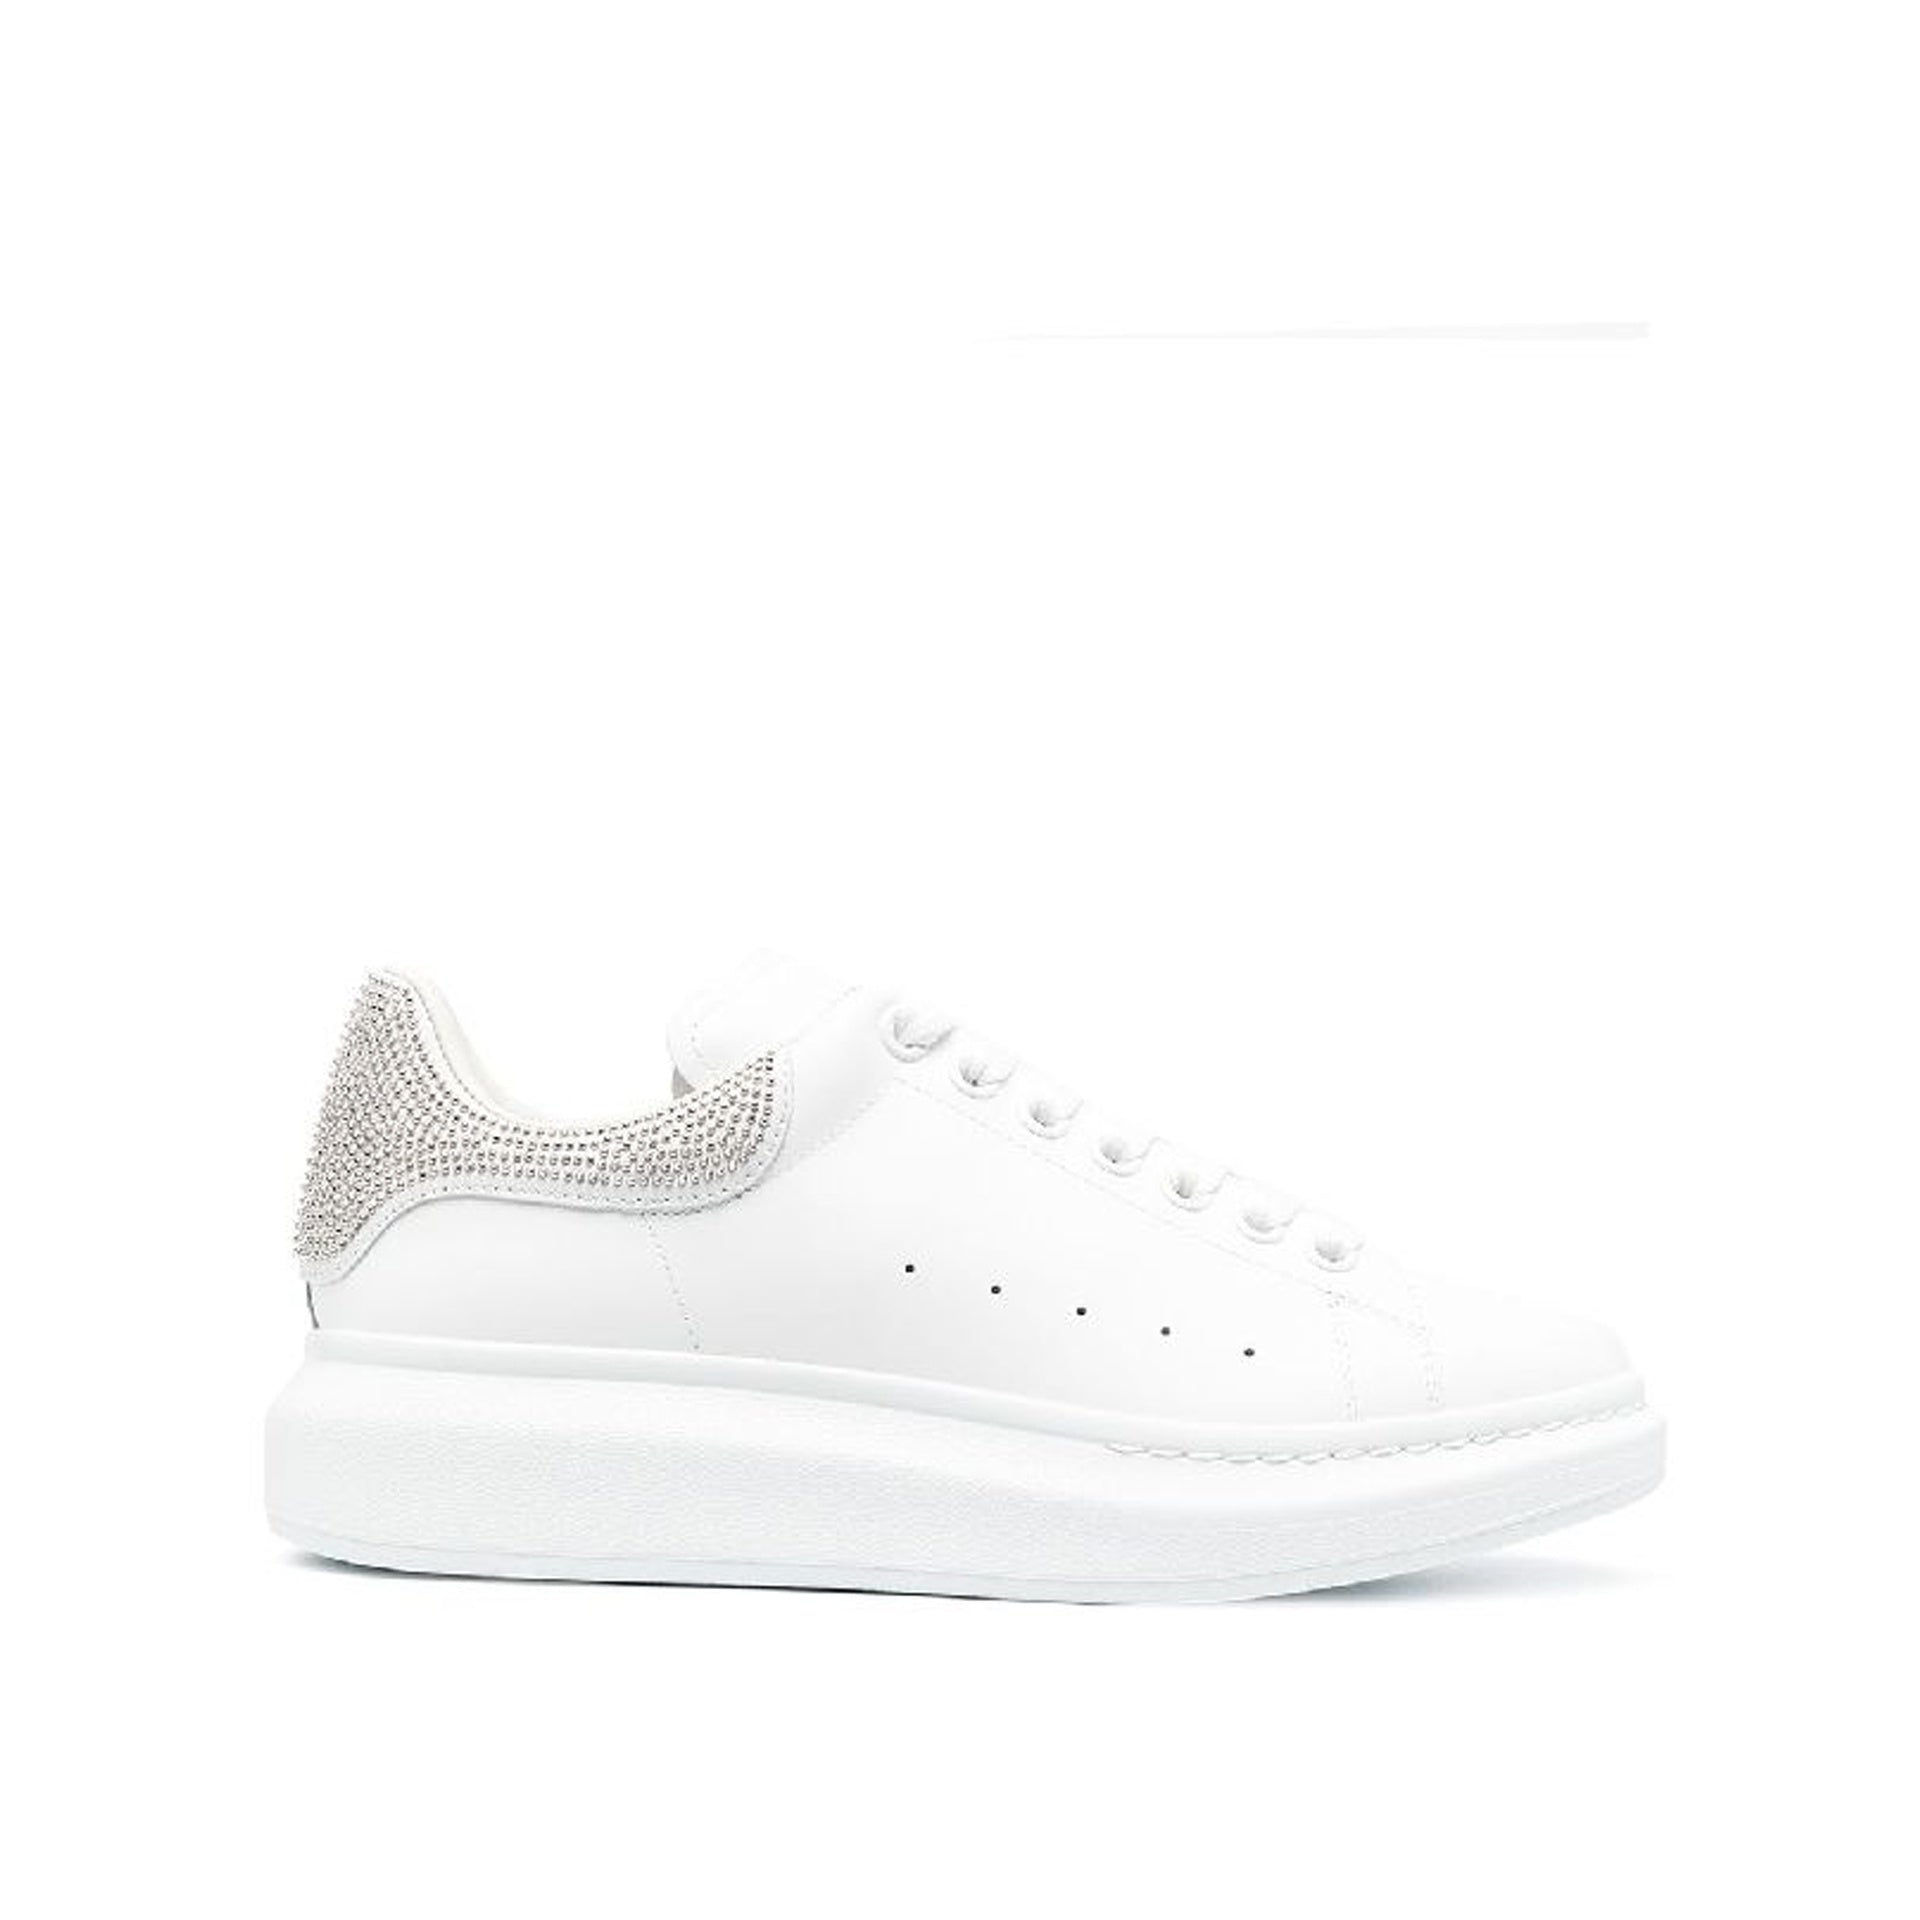 ALEXANDER-MCQUEEN-OUTLET-SALE-Alexander-McQueen-Studded-Oversized-Sneakers-Sneakers-WHITE-49-ARCHIVE-COLLECTION.jpg